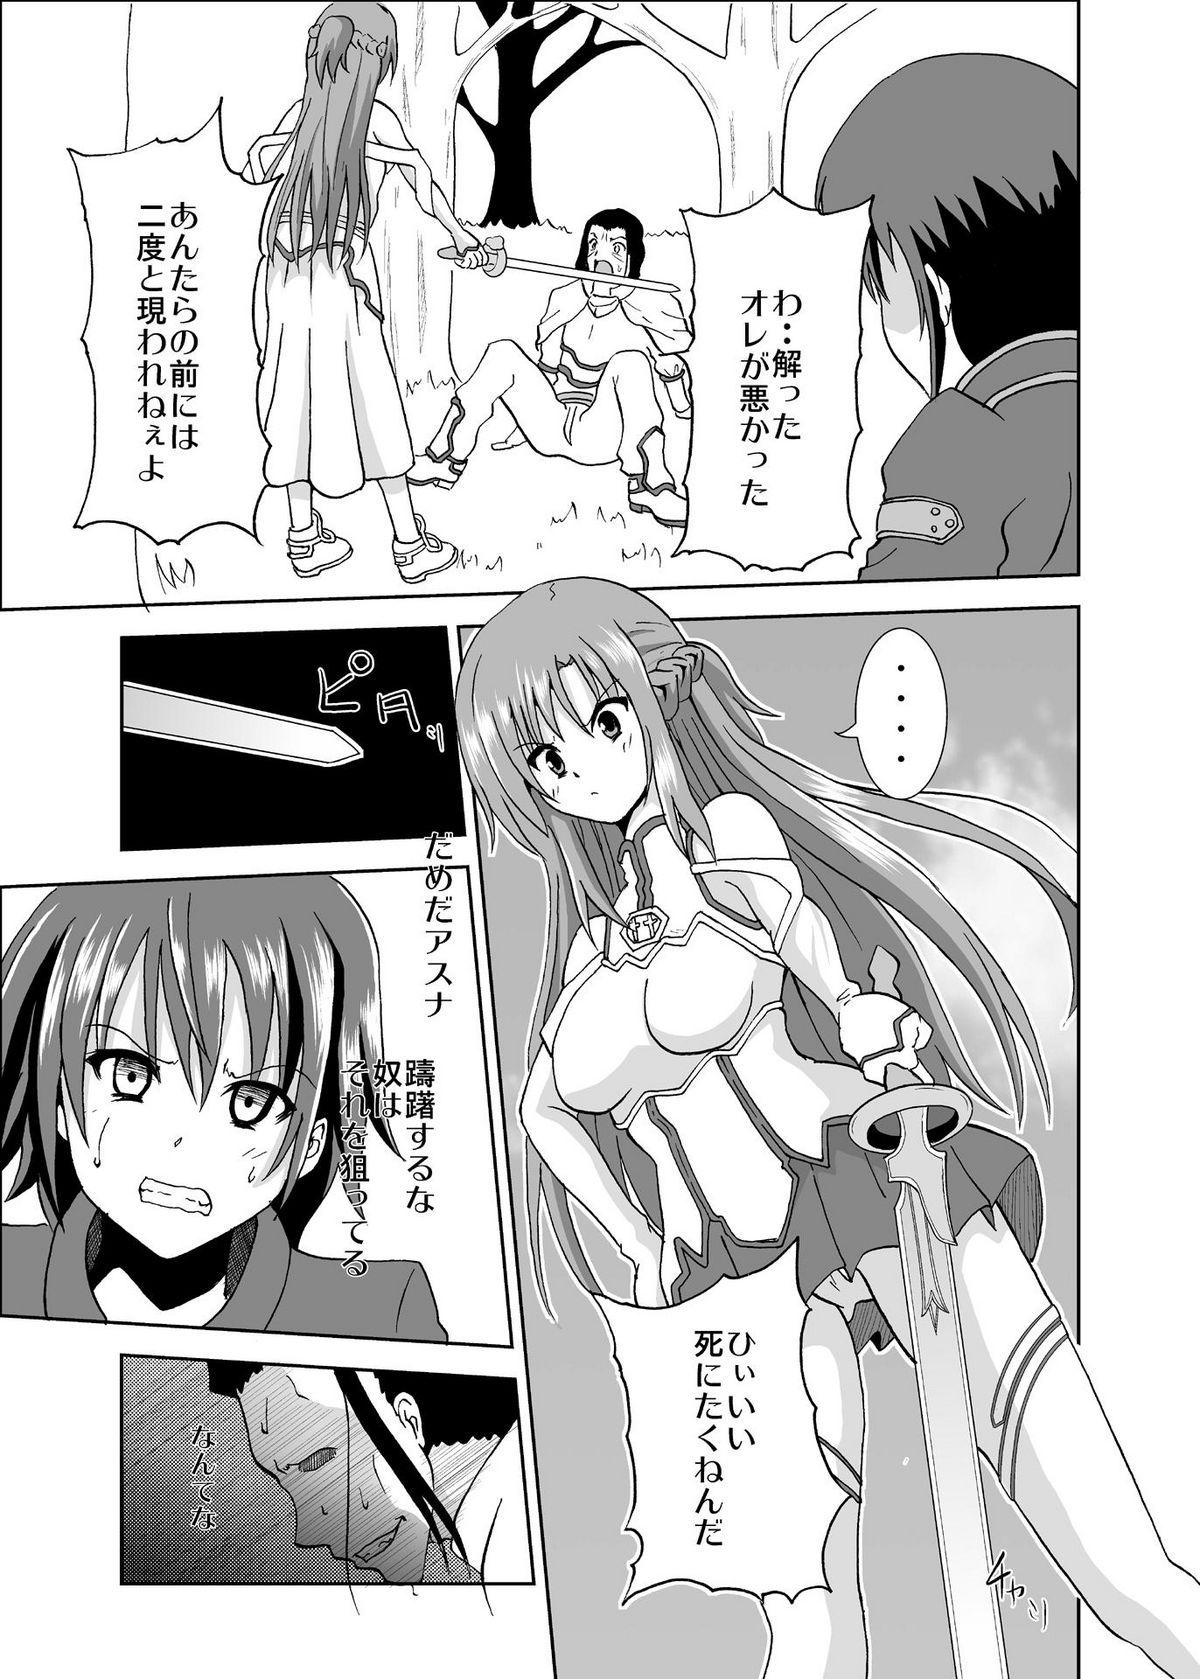 Moreno Defeated Heroine A - Sword art online Girls Getting Fucked - Page 4